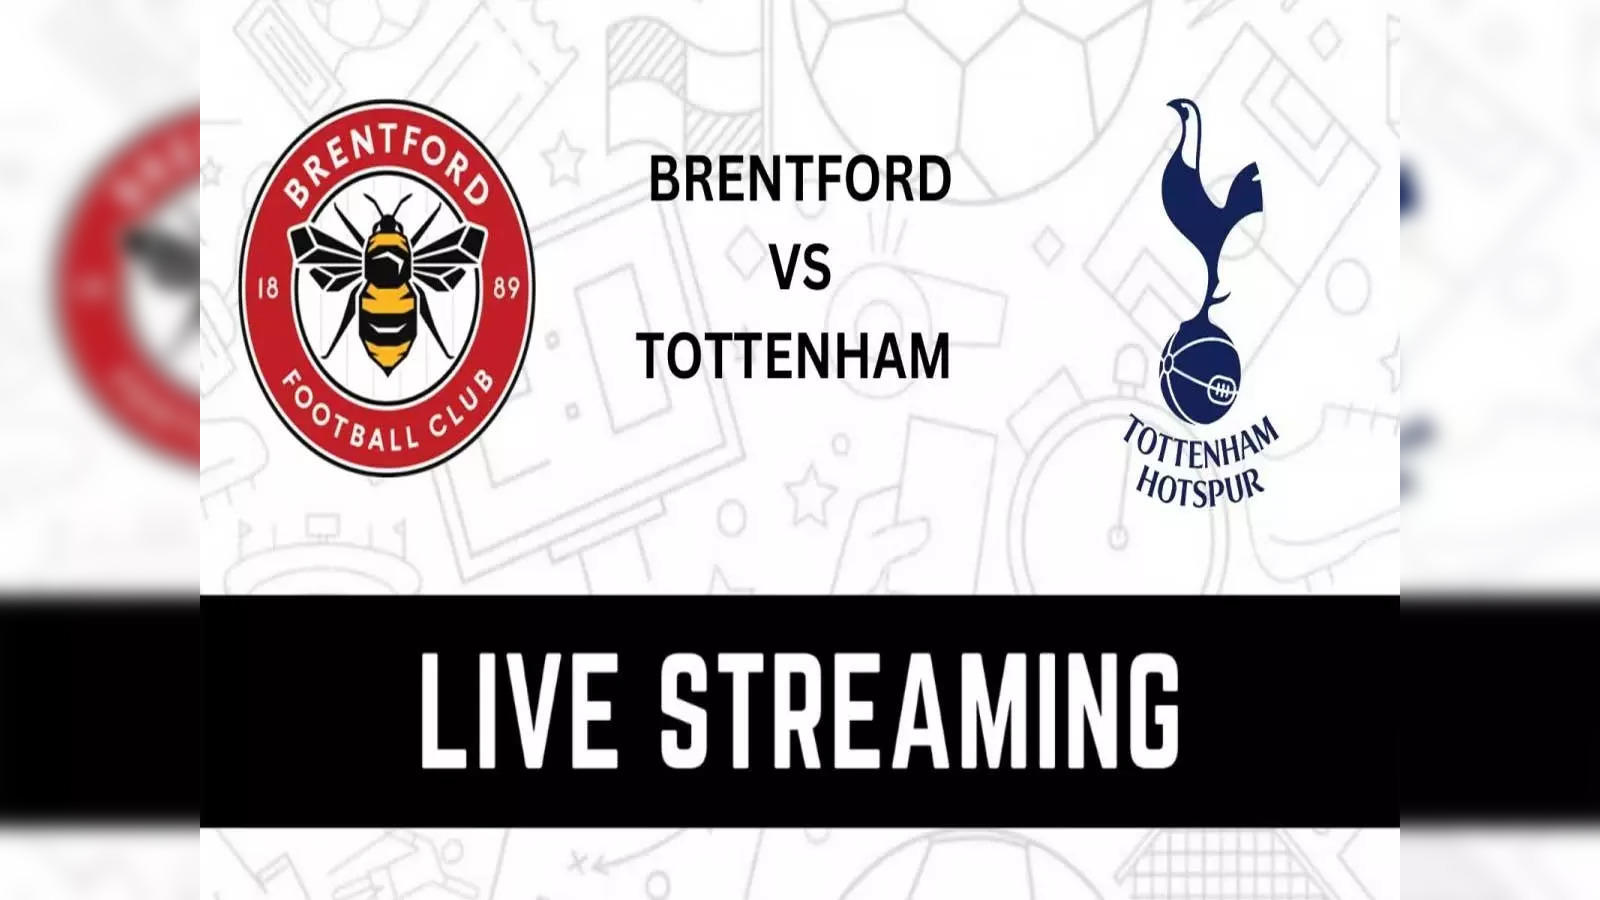 Brentford vs Tottenham Hotspur Premier League match live streaming Check kick off date, time, how to watch and more